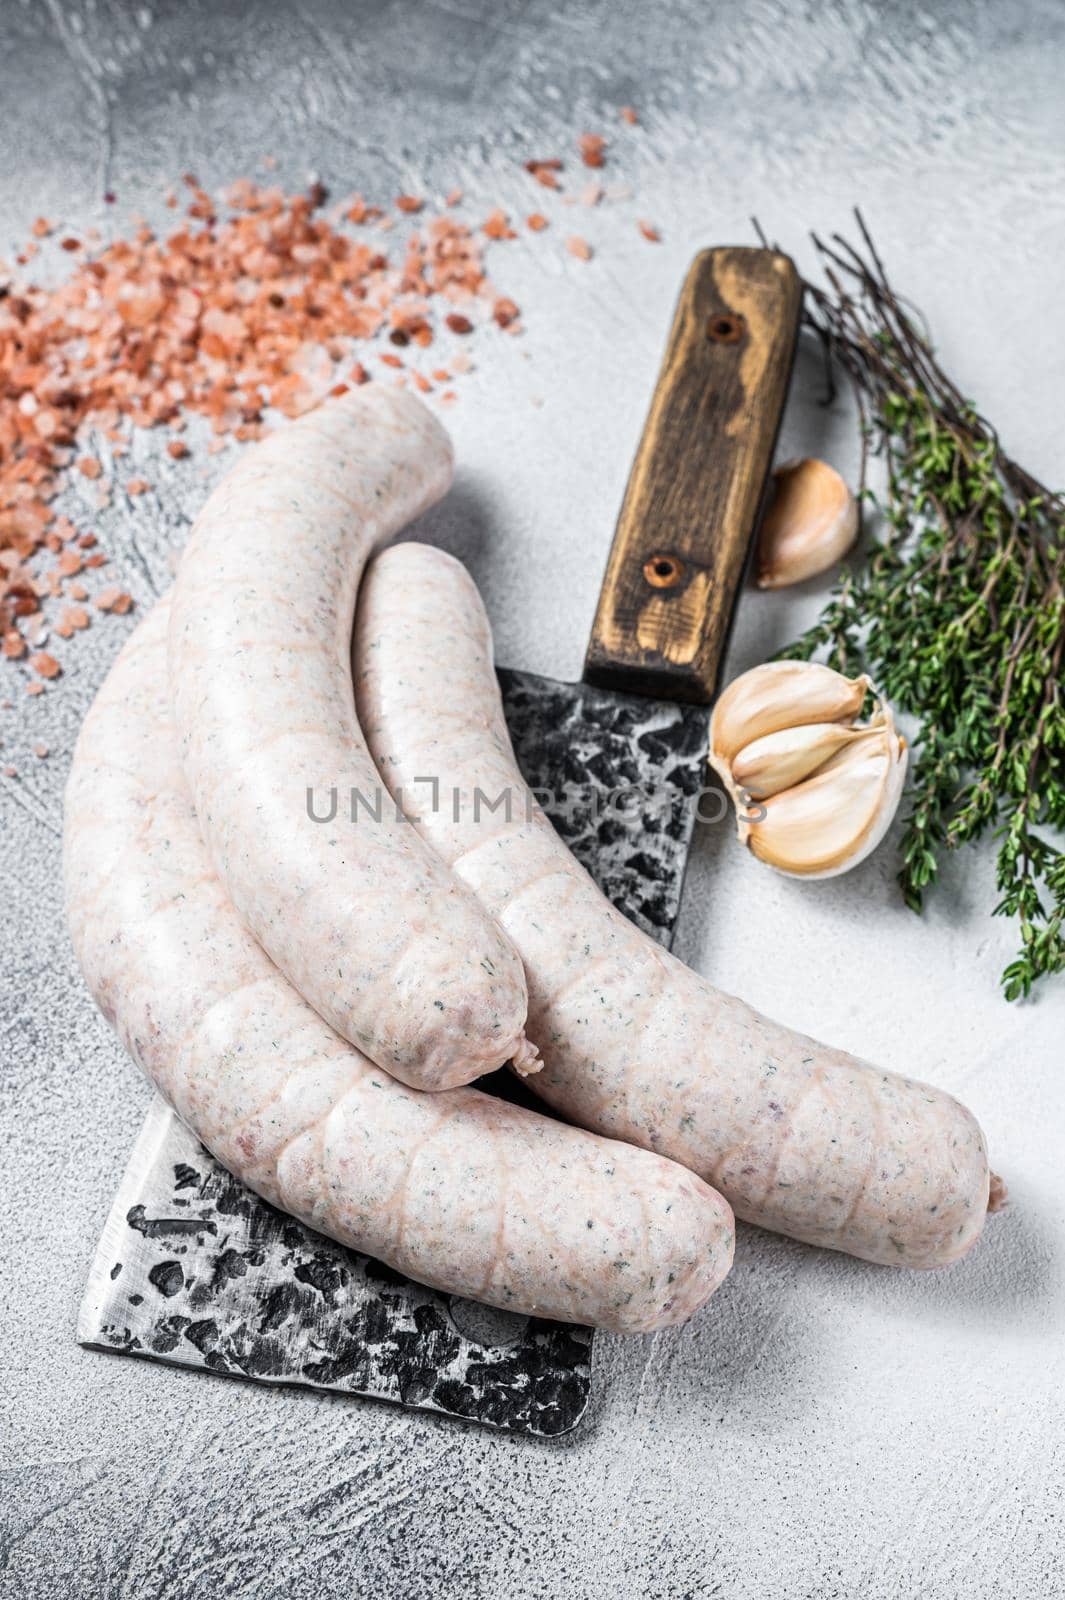 Bavarian traditional white sausages on a meat cleaver. White background. Top view by Composter